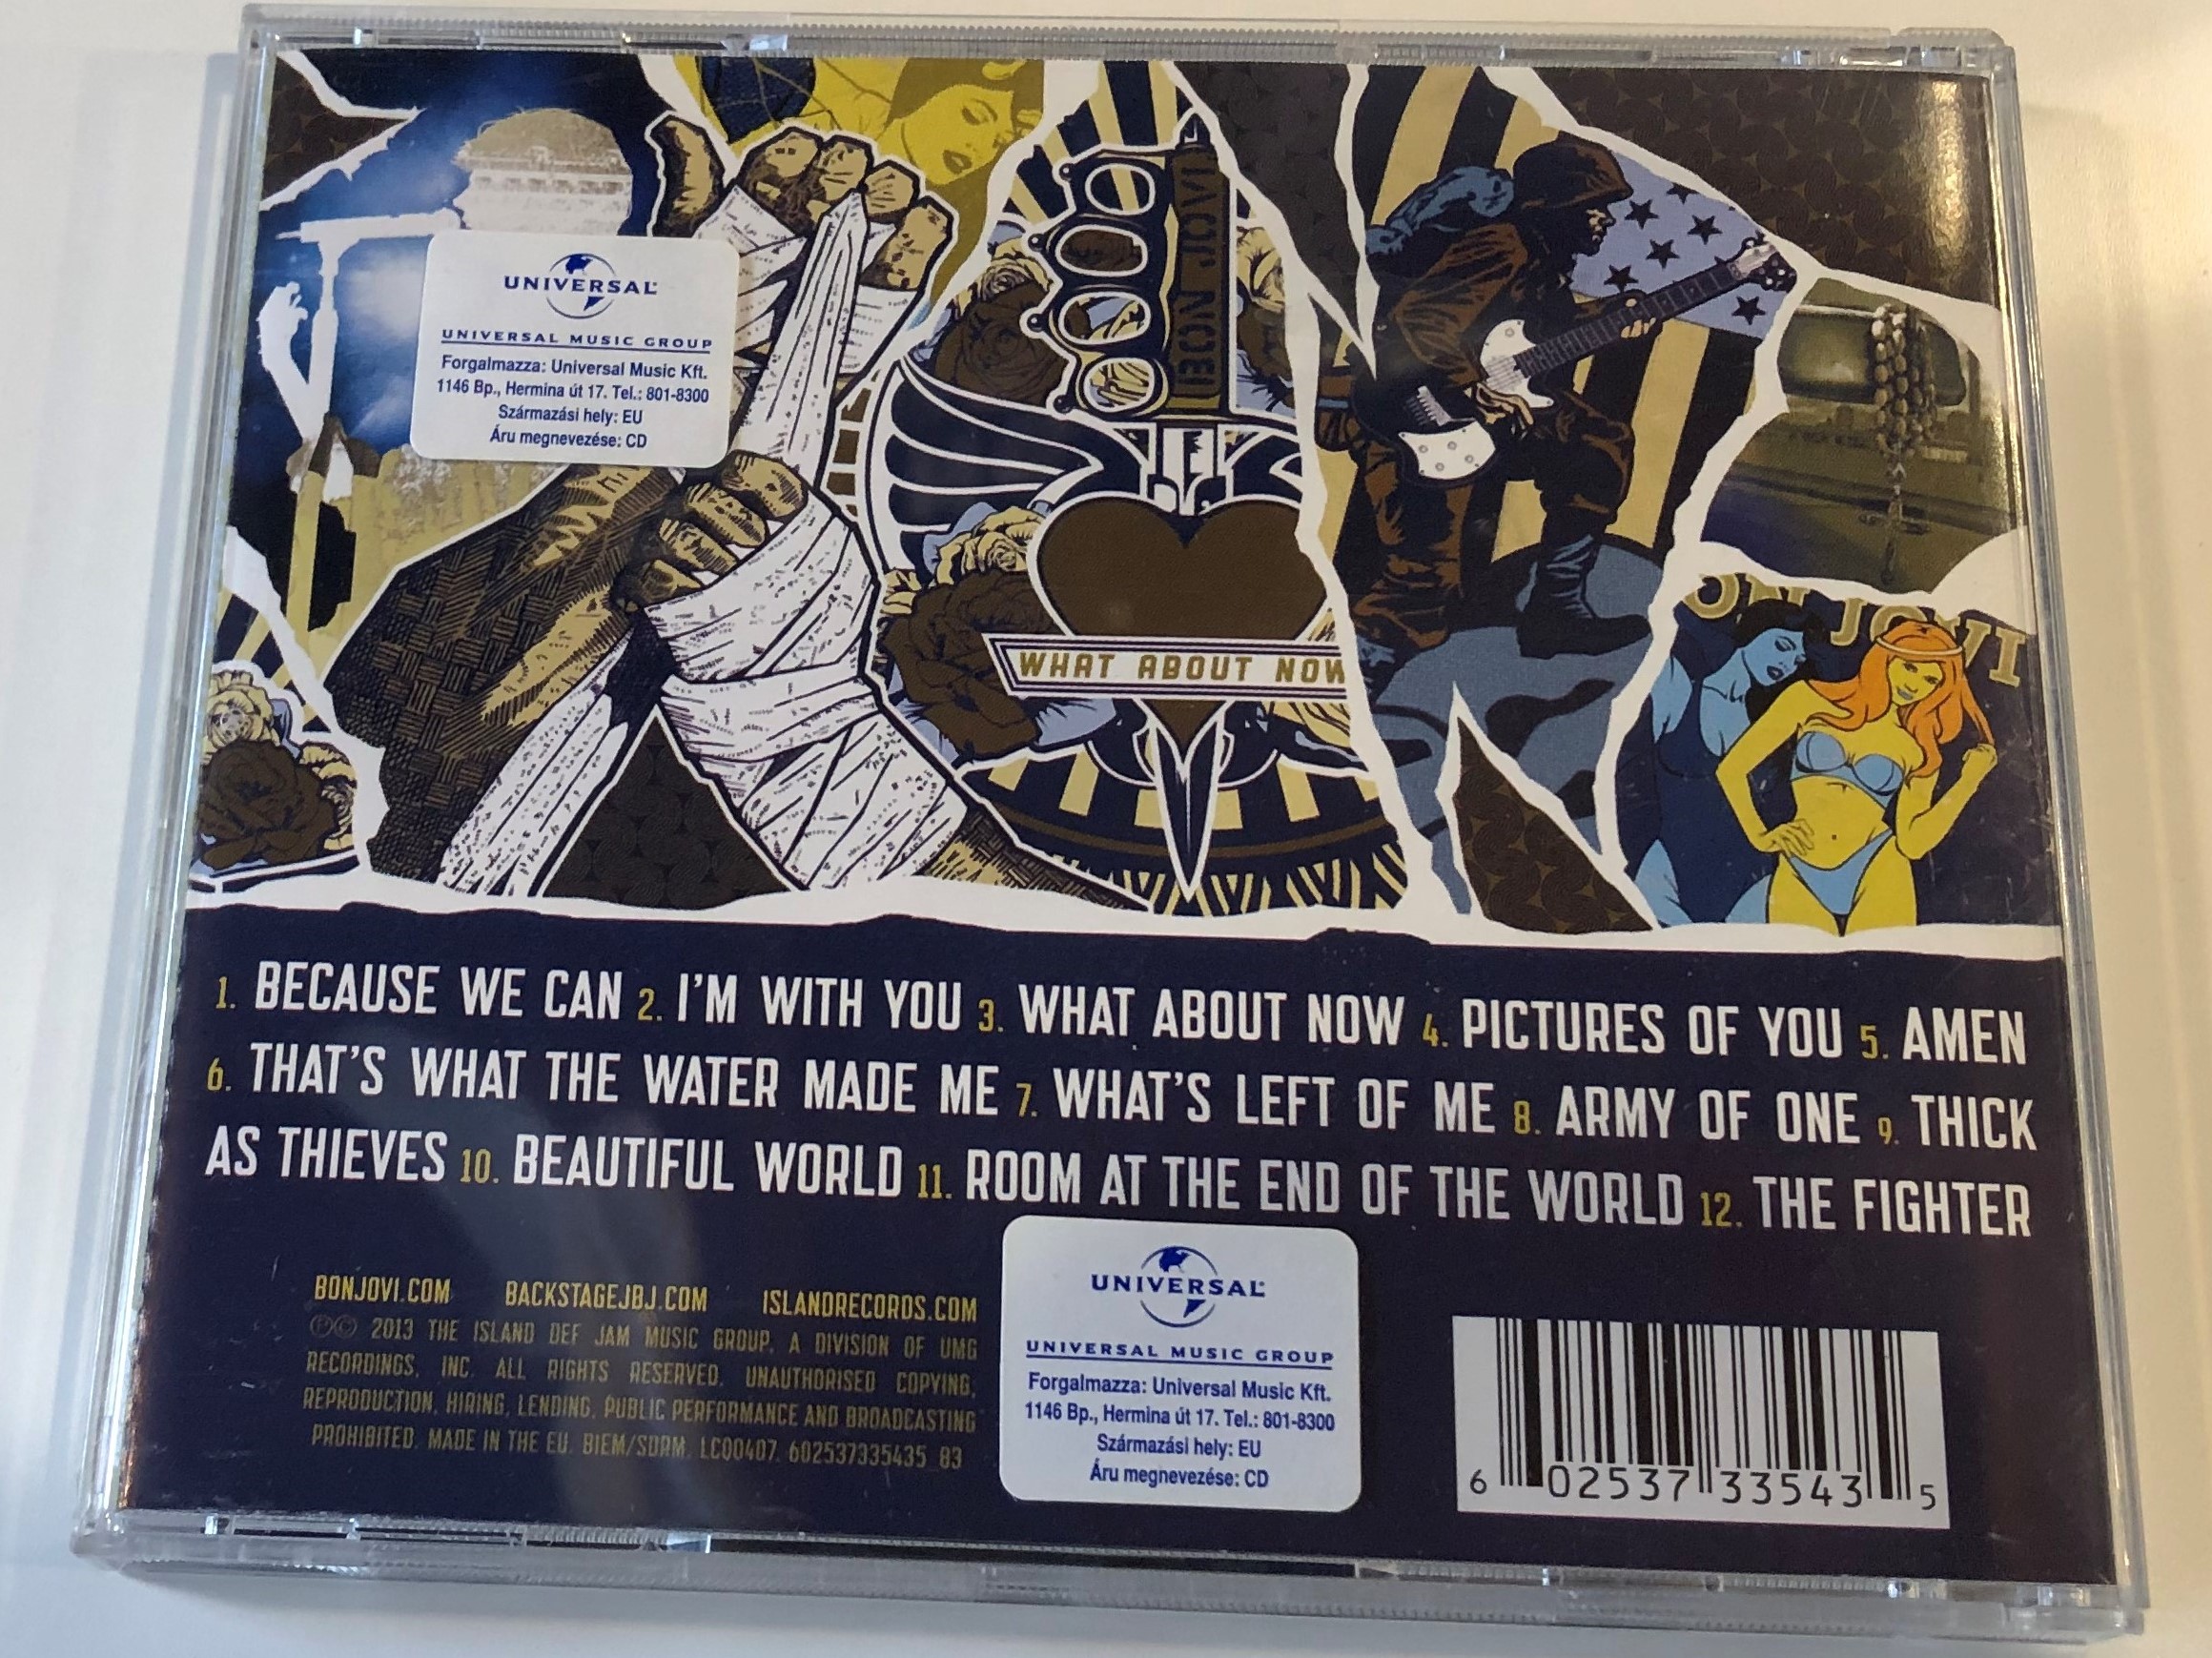 bon-jovi-what-about-now-made-in-hungary-island-records-audio-cd-2013-602537335435-83-3-.jpg